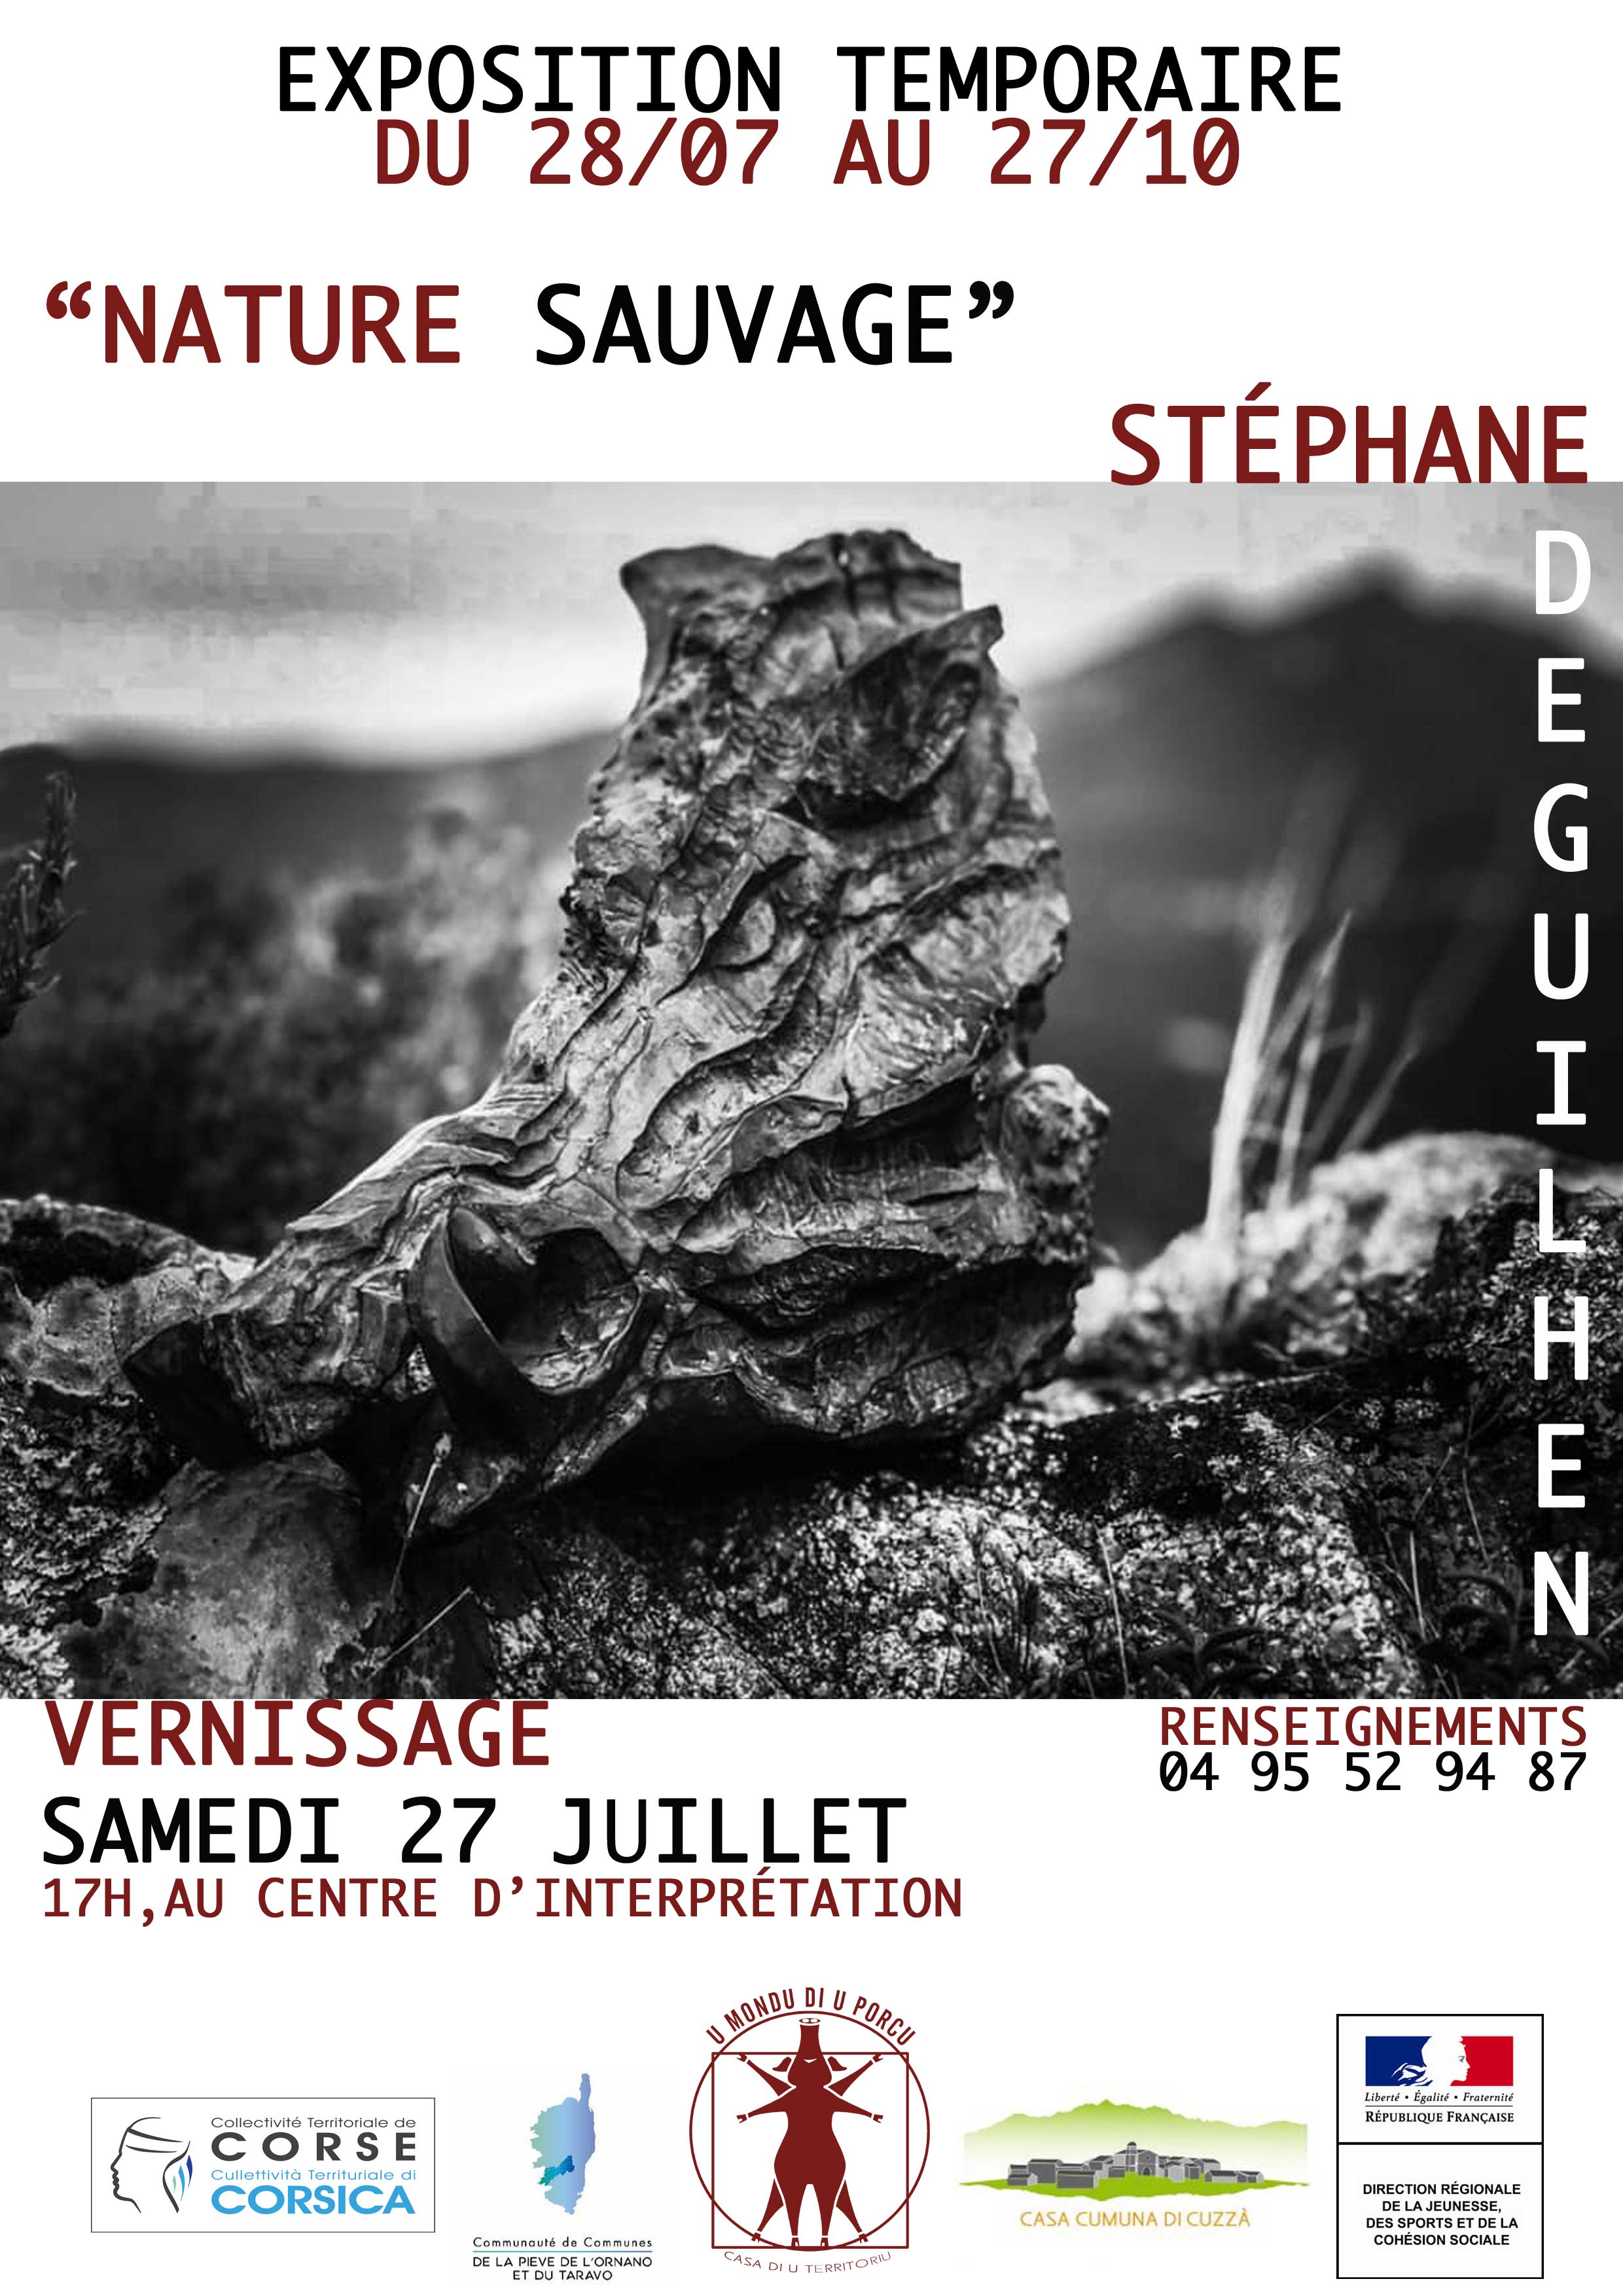 Nature Sauvage - exposition temporaire